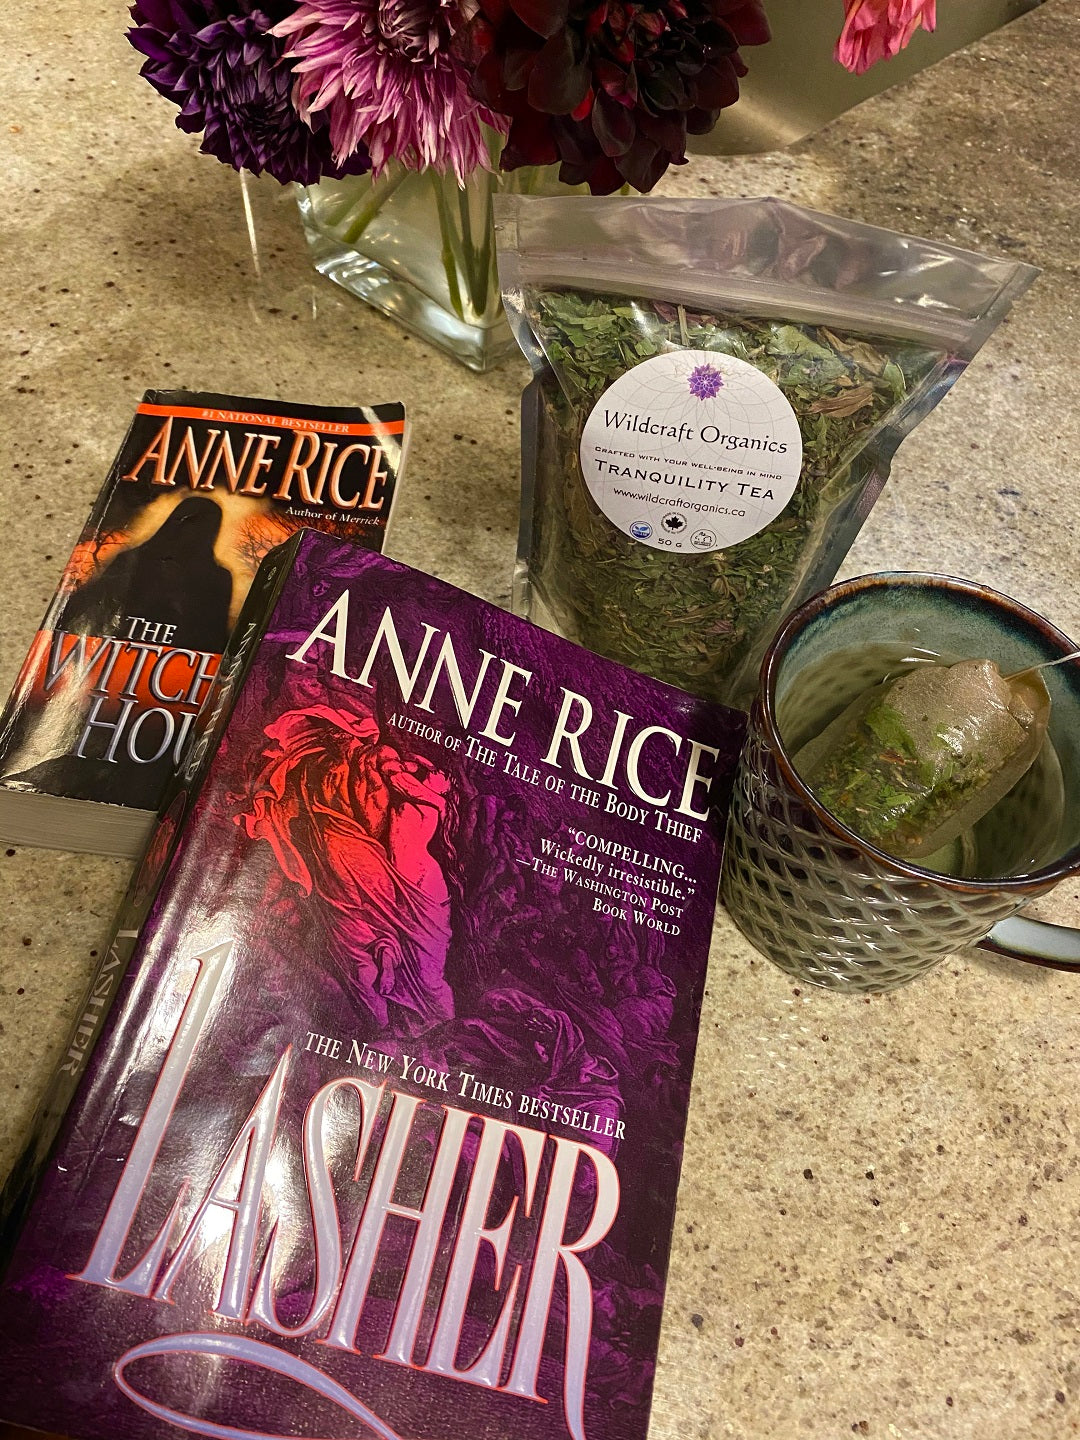 Tranquillity tea and Books by Anne Rice